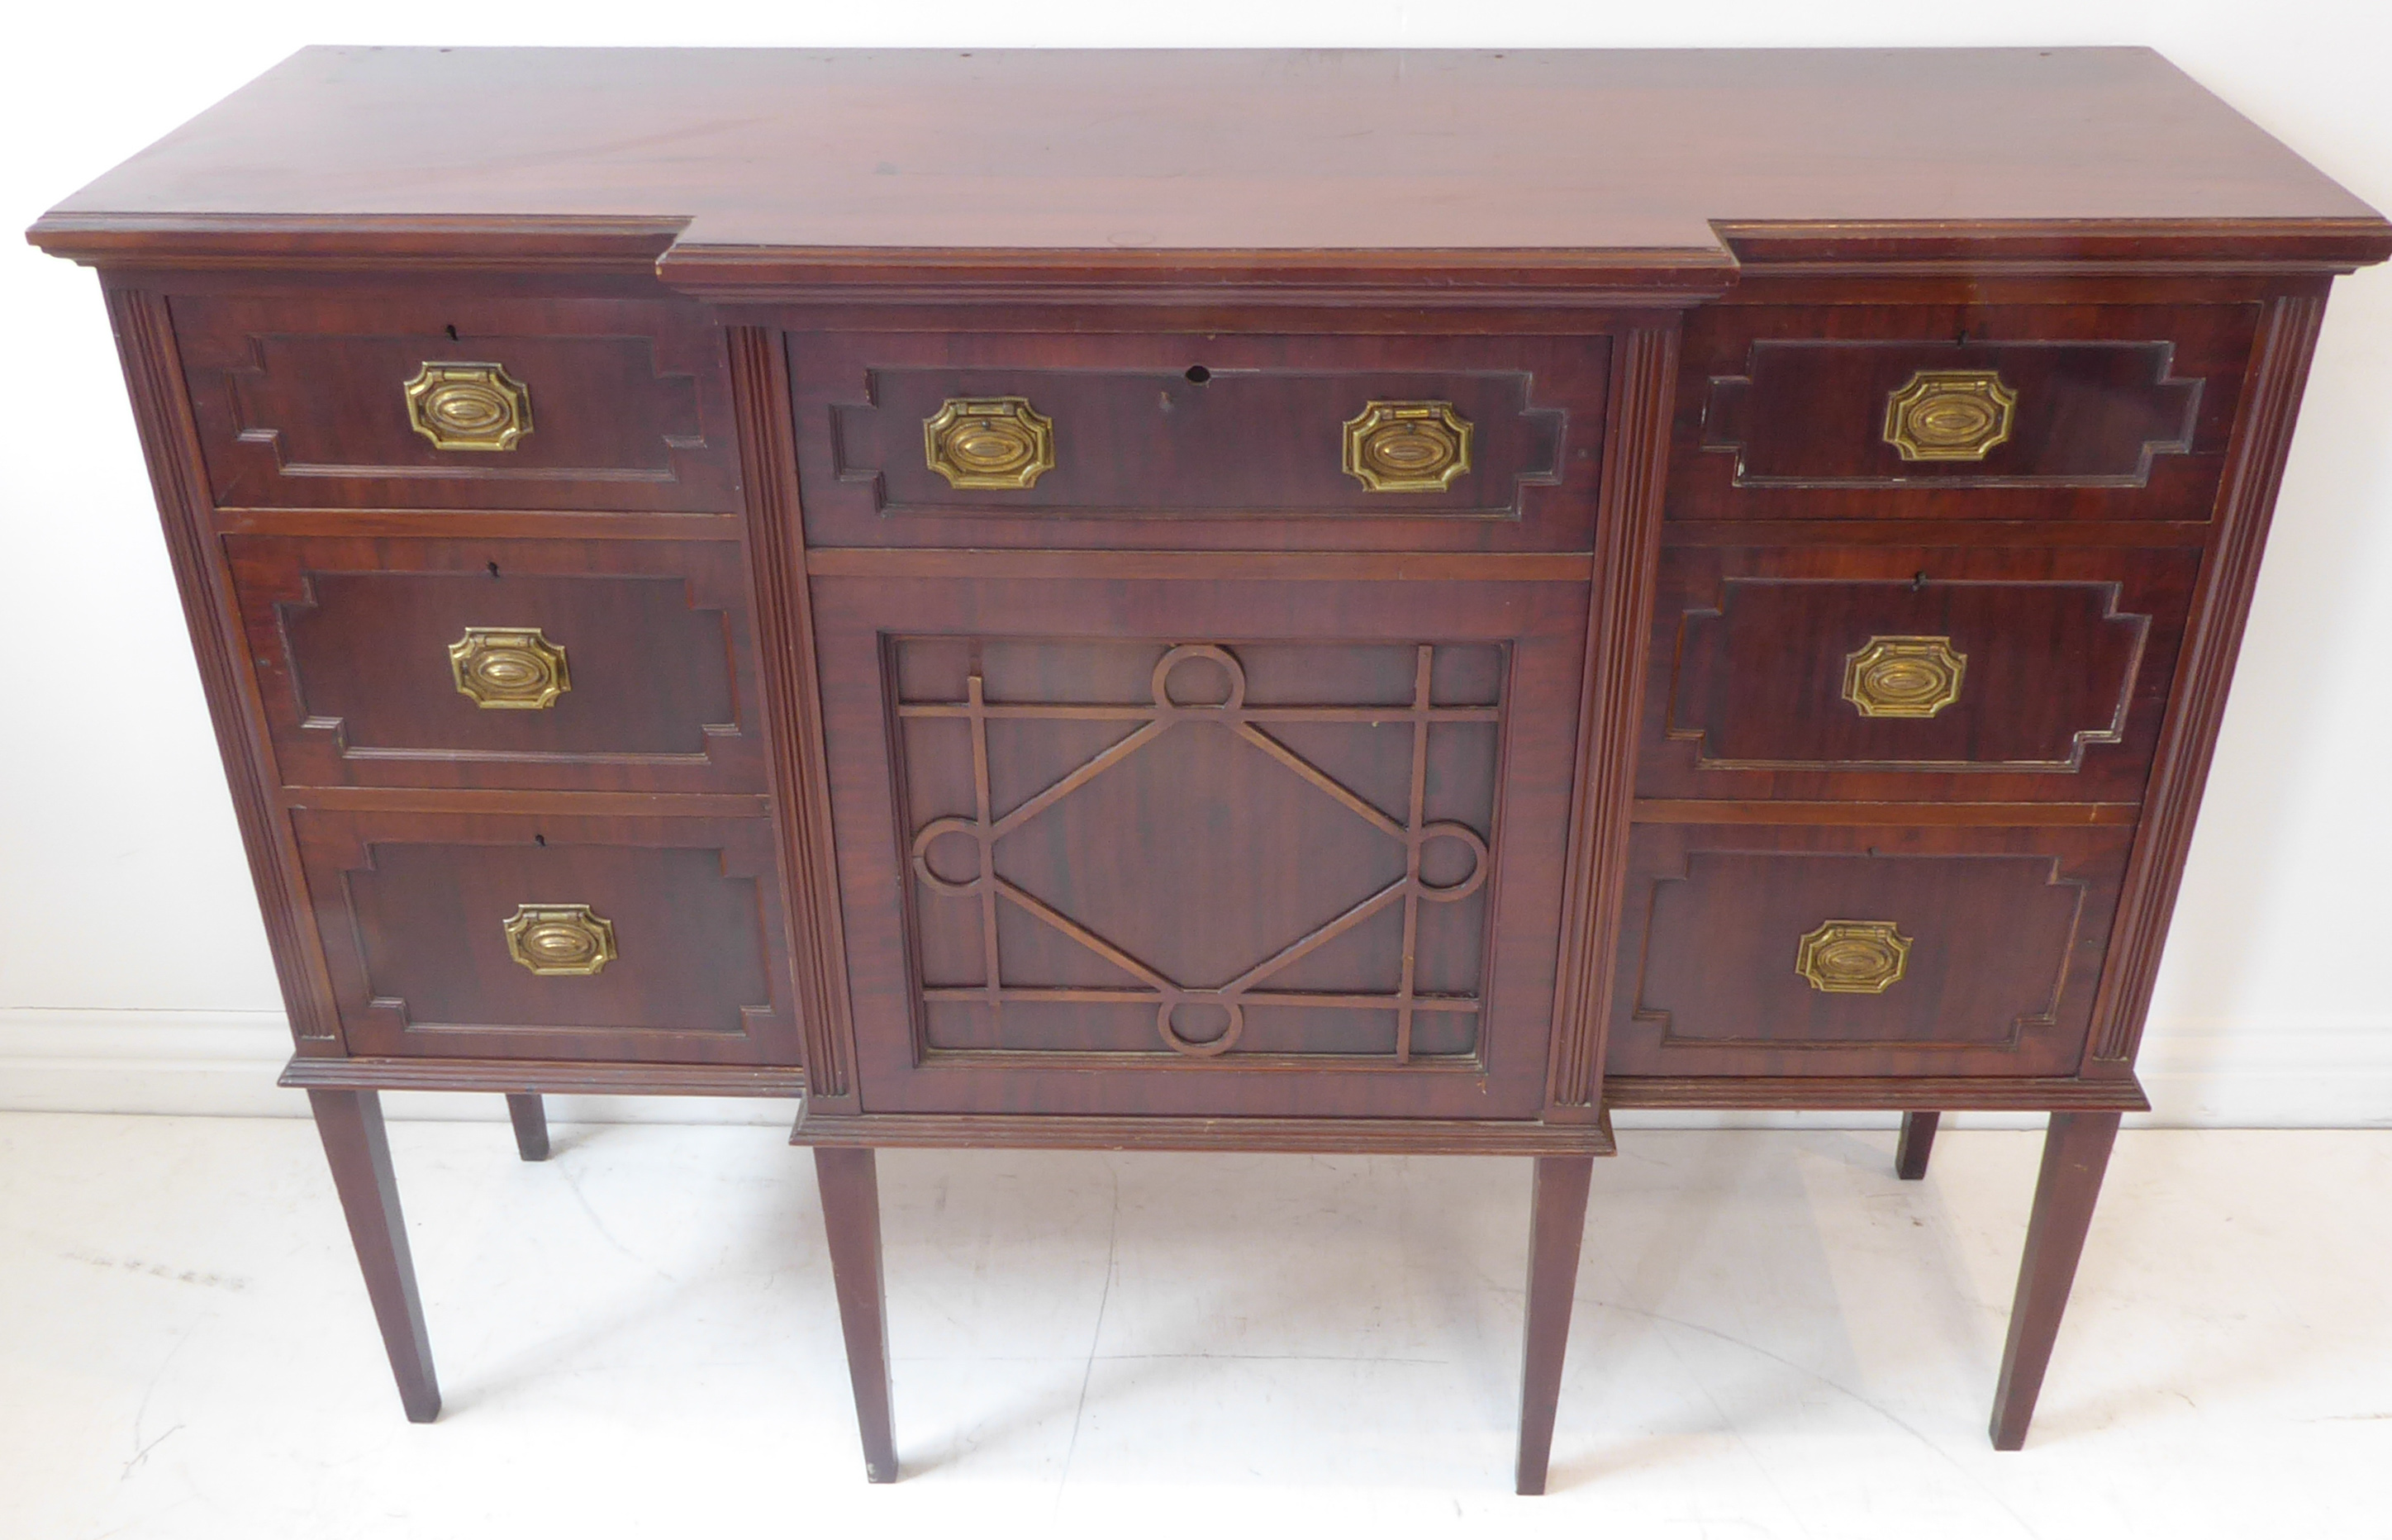 An early 20th century mahogany side cabinet in late 18th century George III style – the breakfront